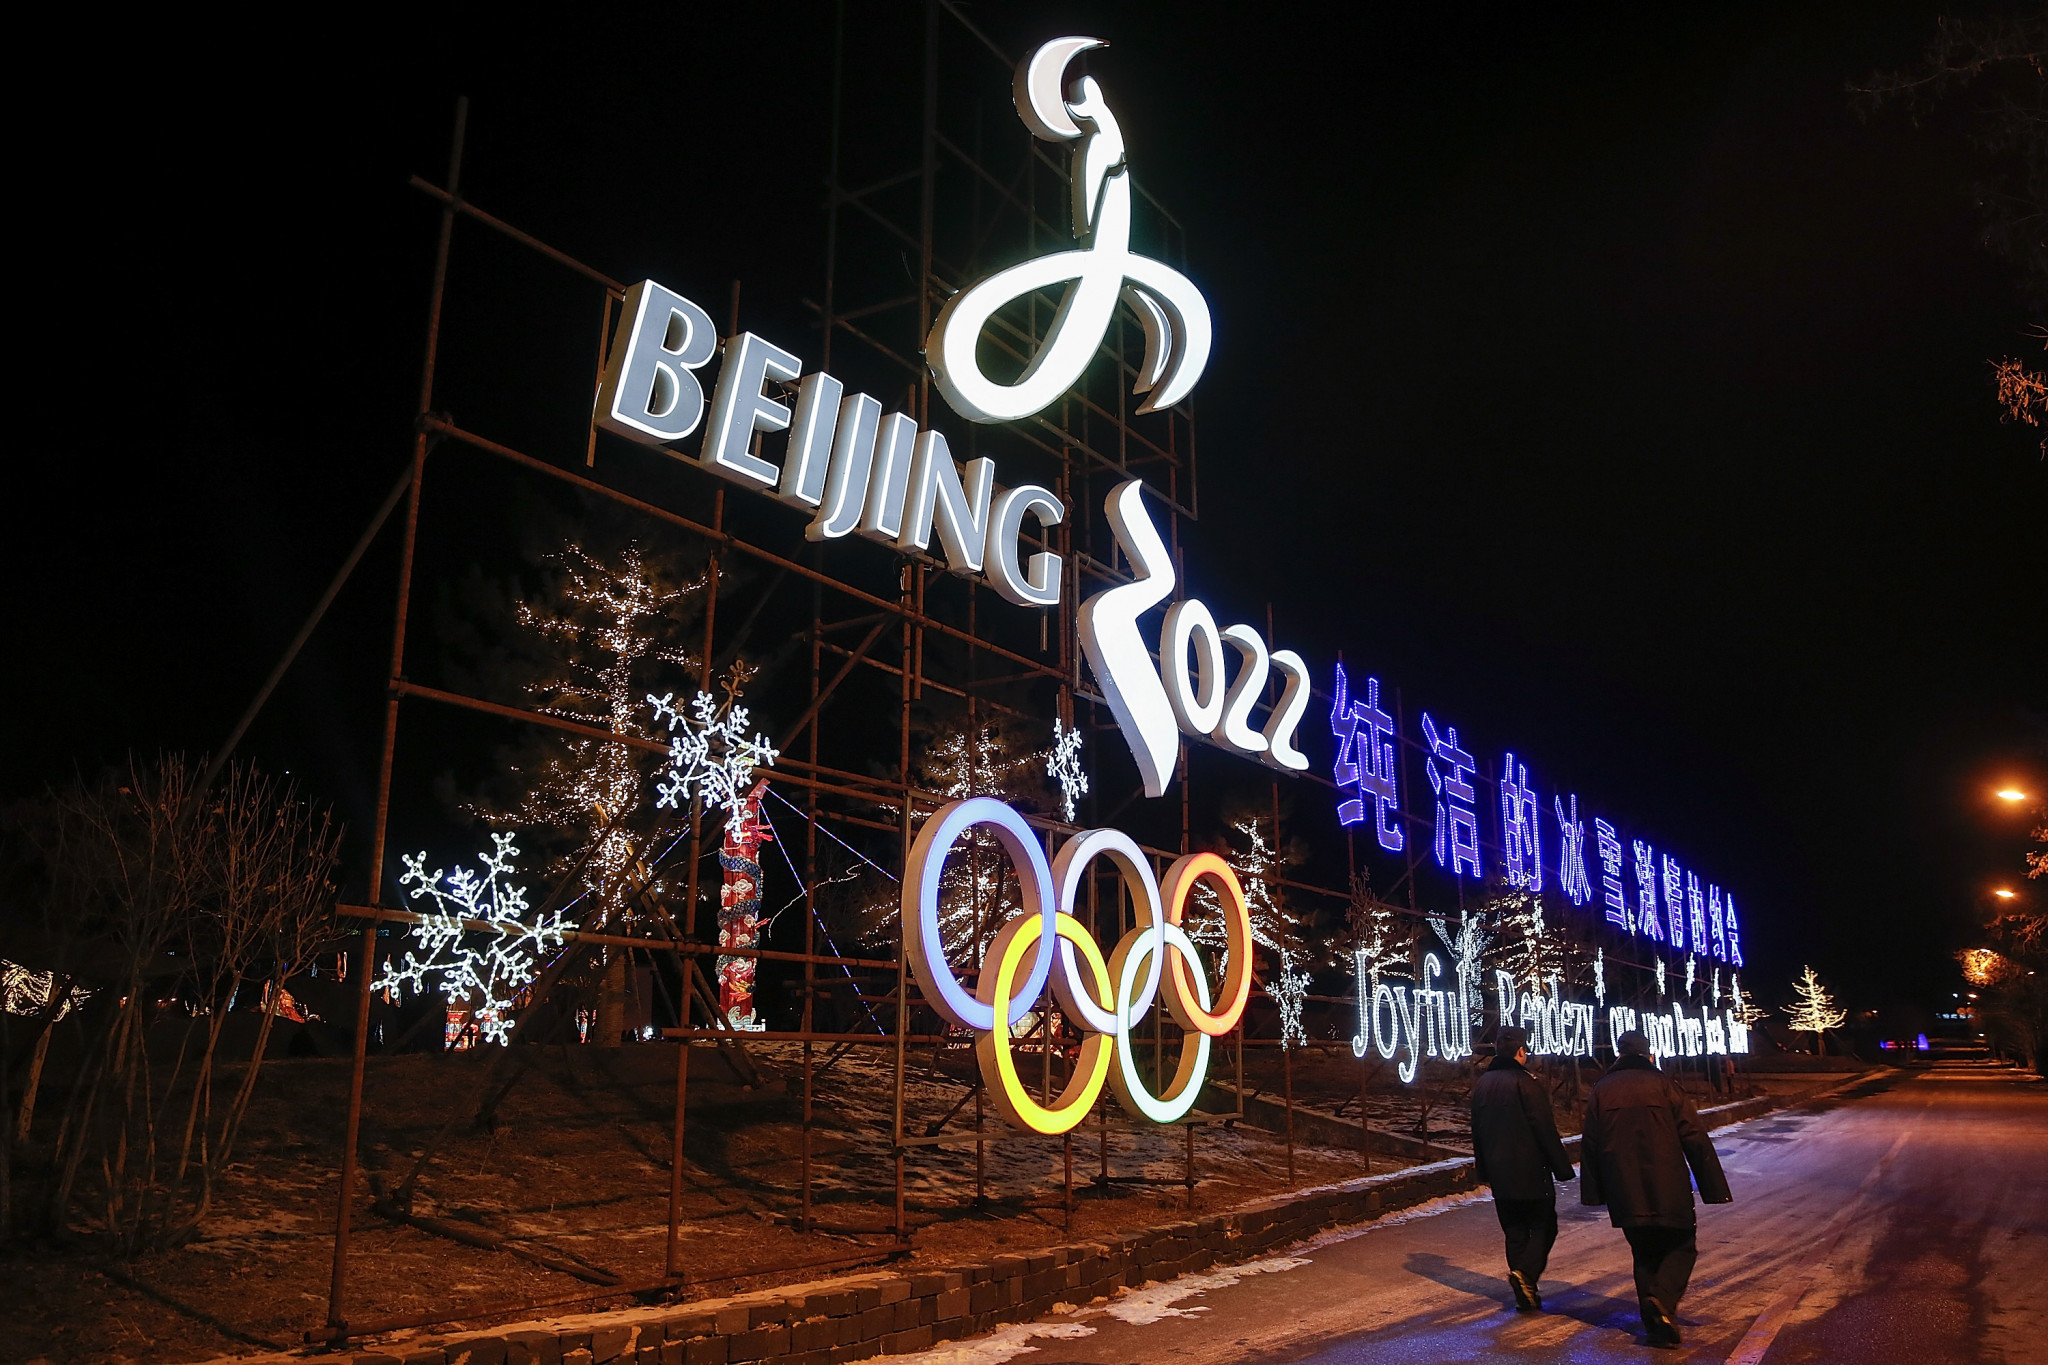 An Olympic branding and design expert has said the Beijing 2022 mascots should "avoid cliches" ©Getty Images